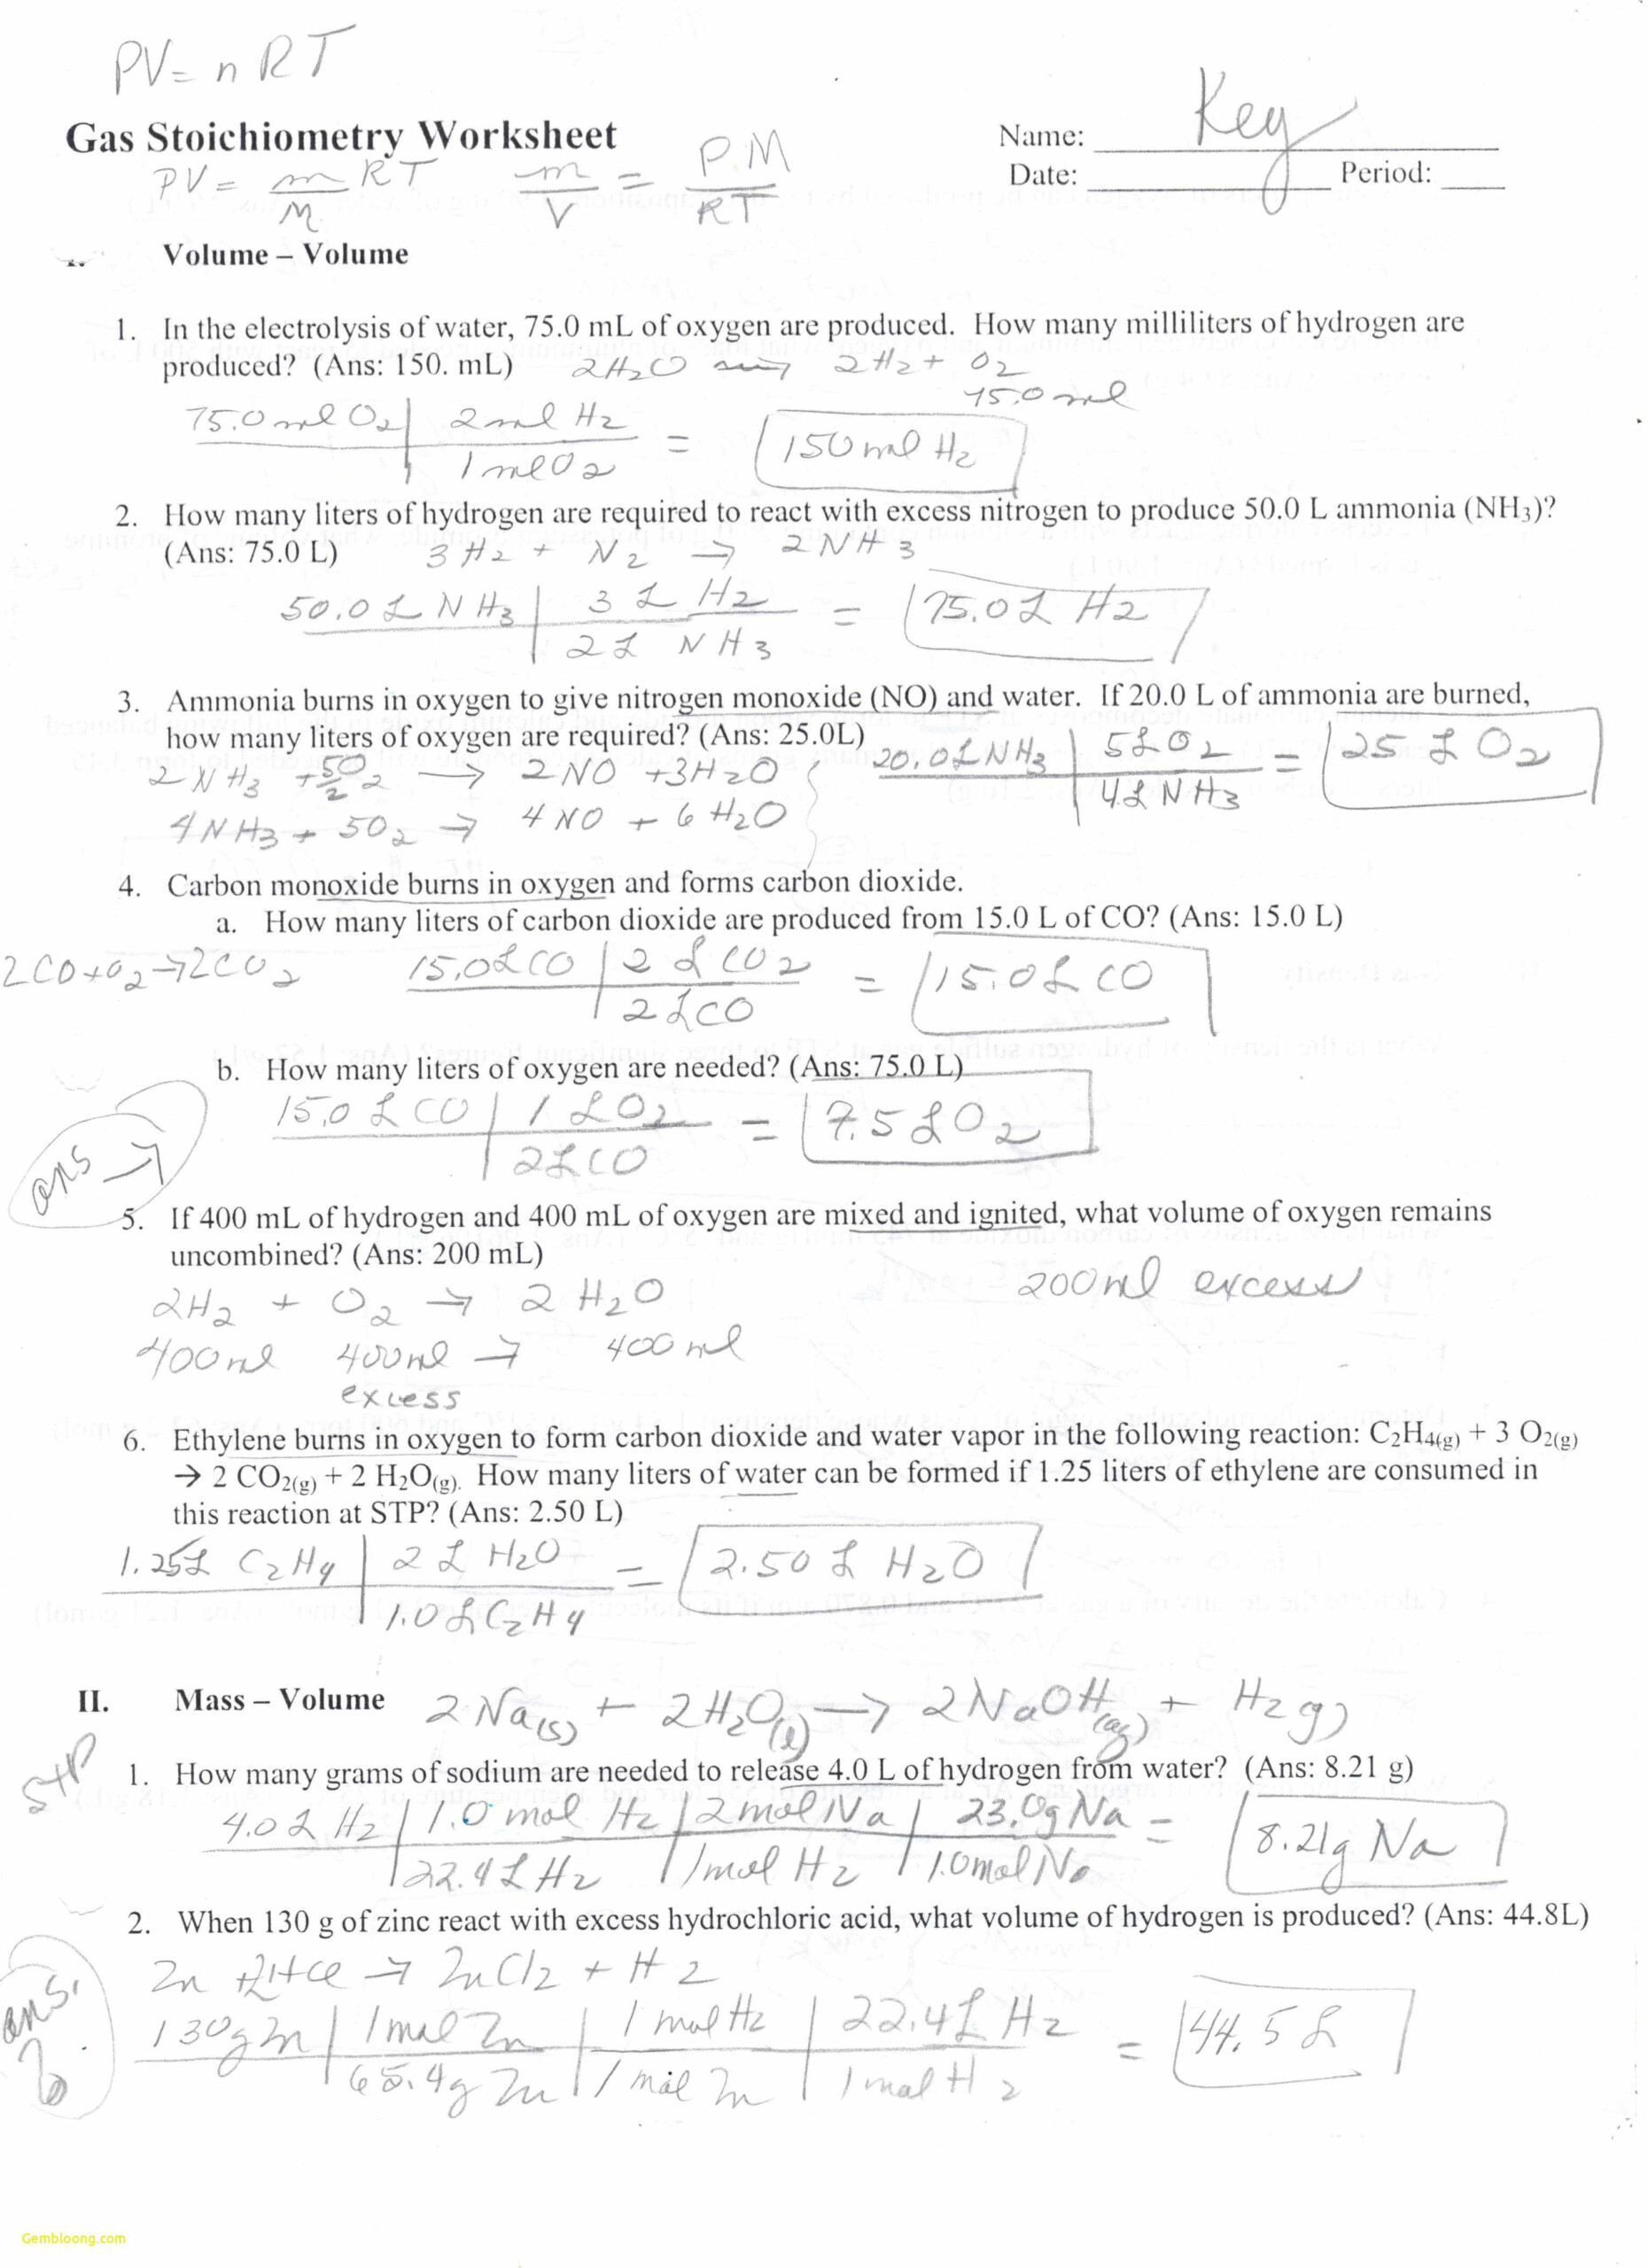 Gas Stoichiometry Worksheet With Solutions Practices Worksheets